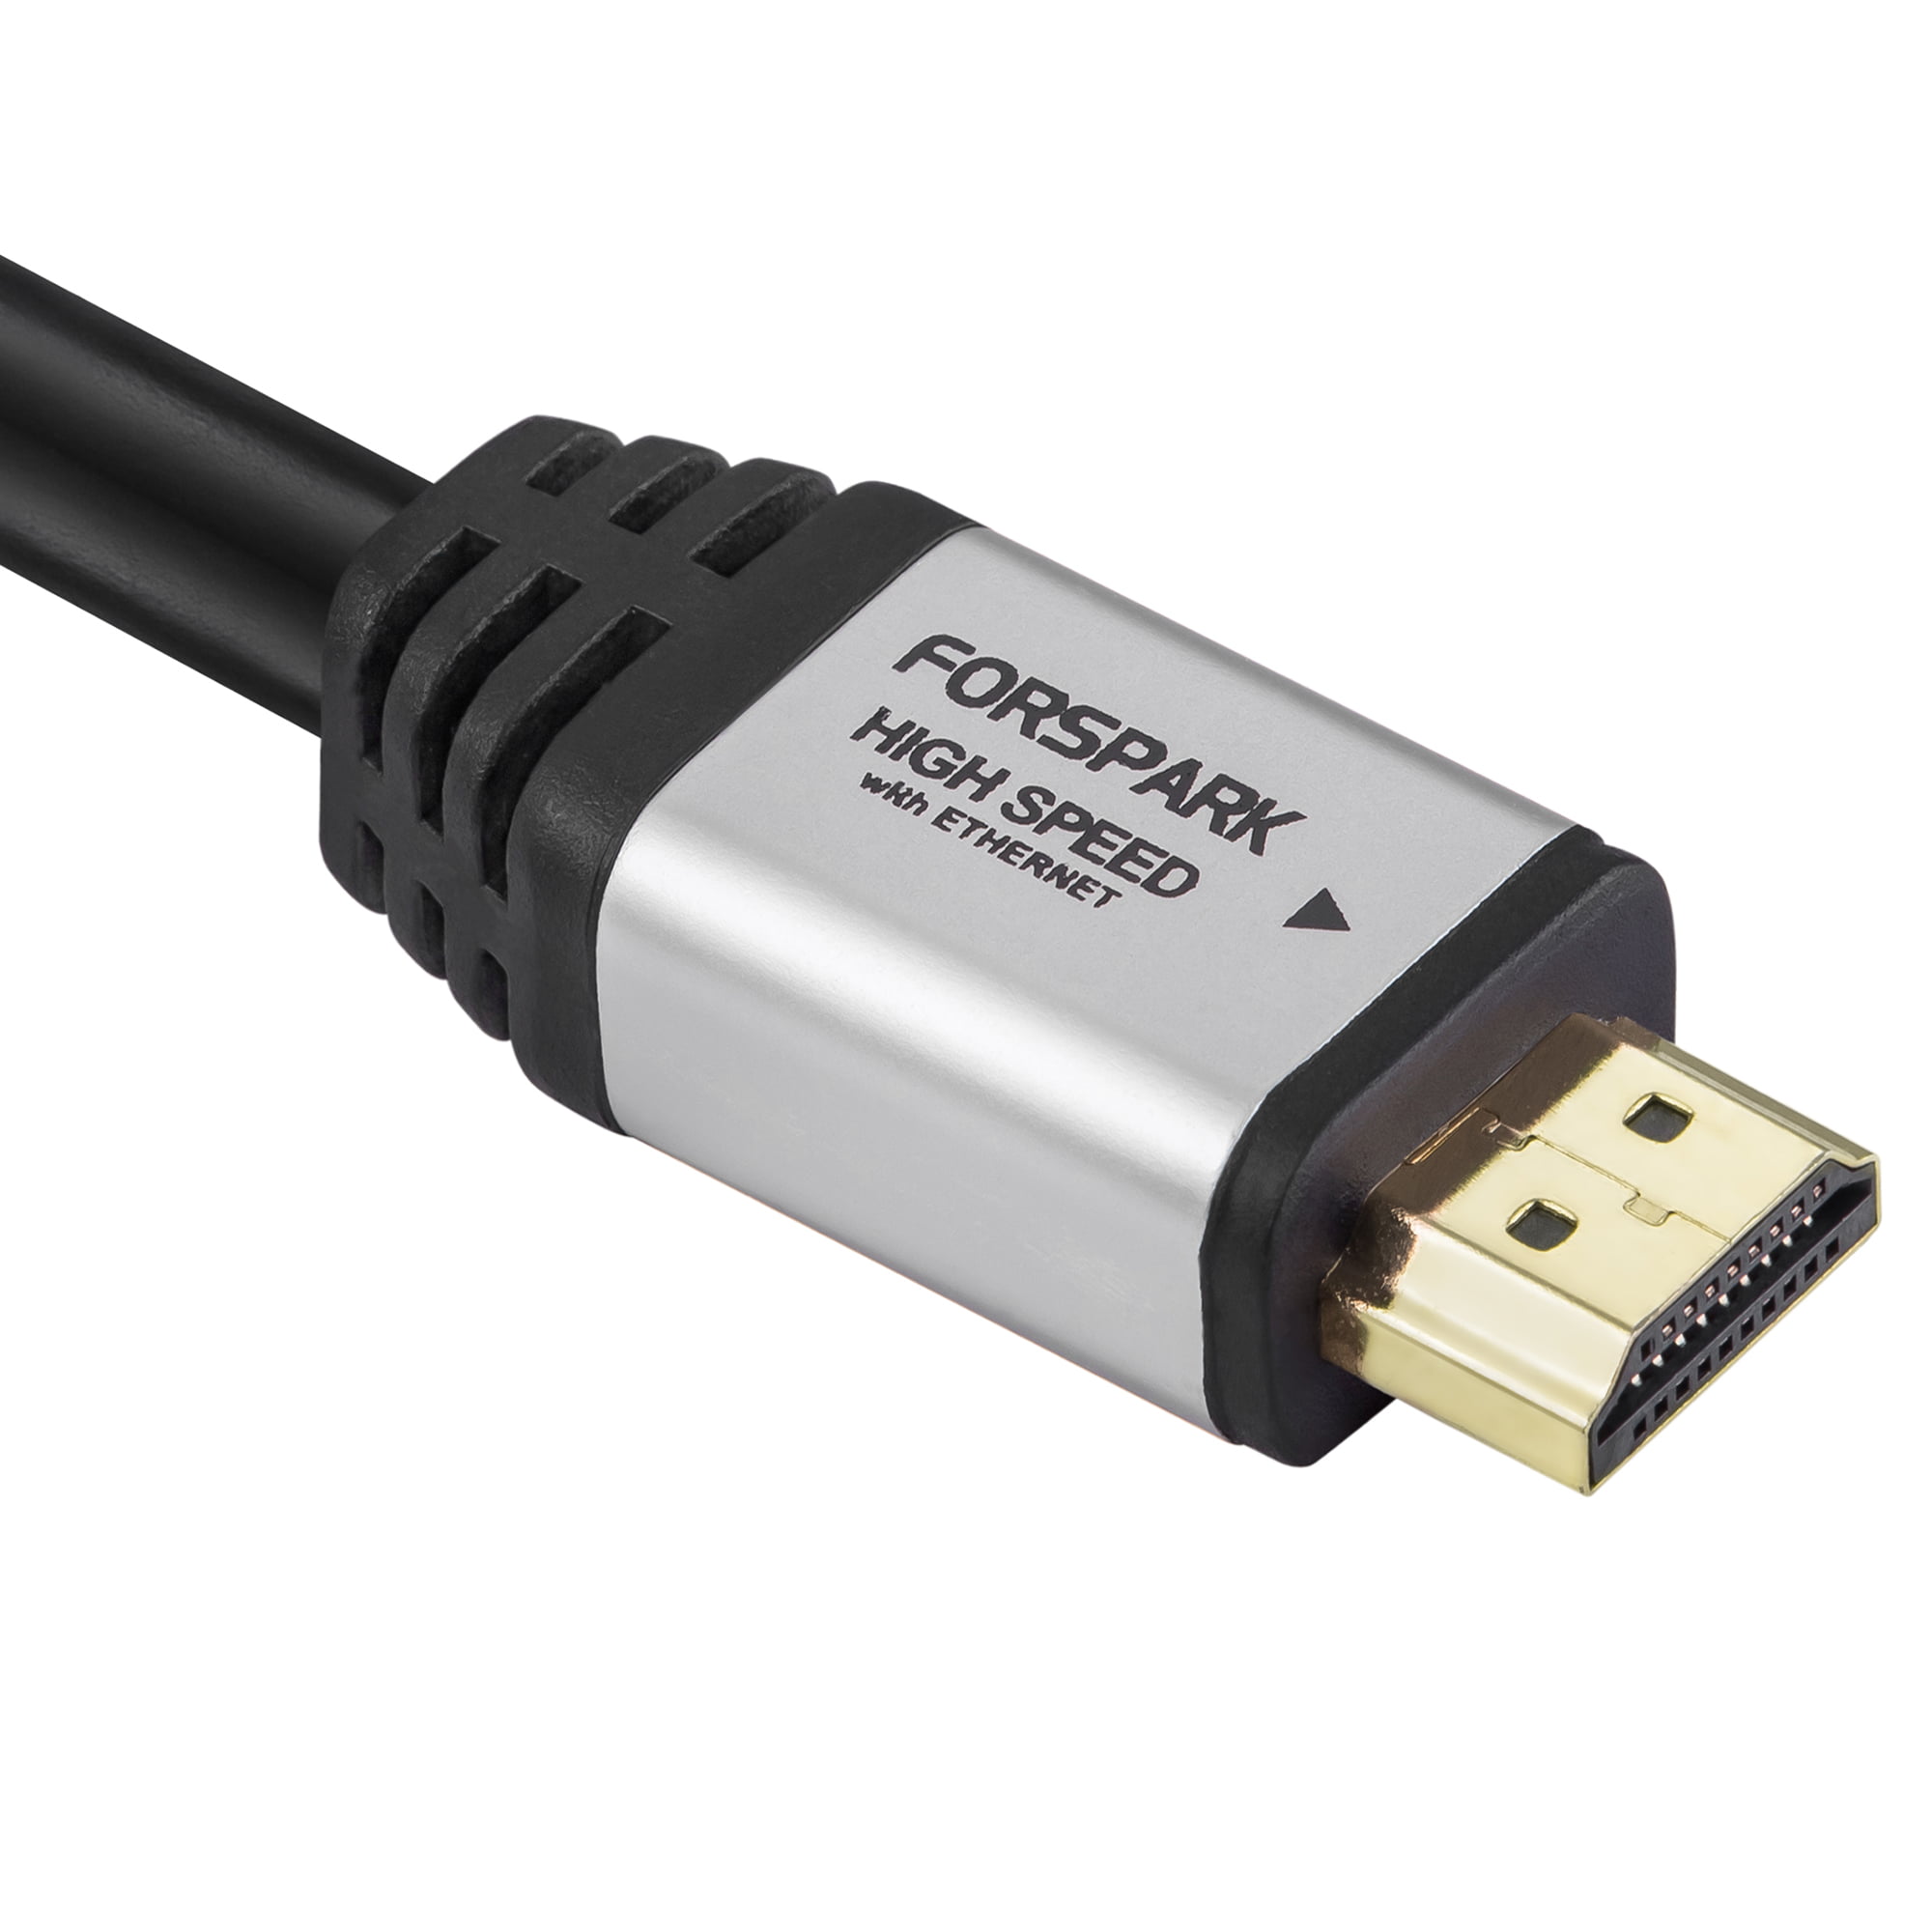 PACK OF HDMI 4K CABLE ULTRA SPEED FOR BLURAY HDTV W/ ETHERNET 1080P HD 